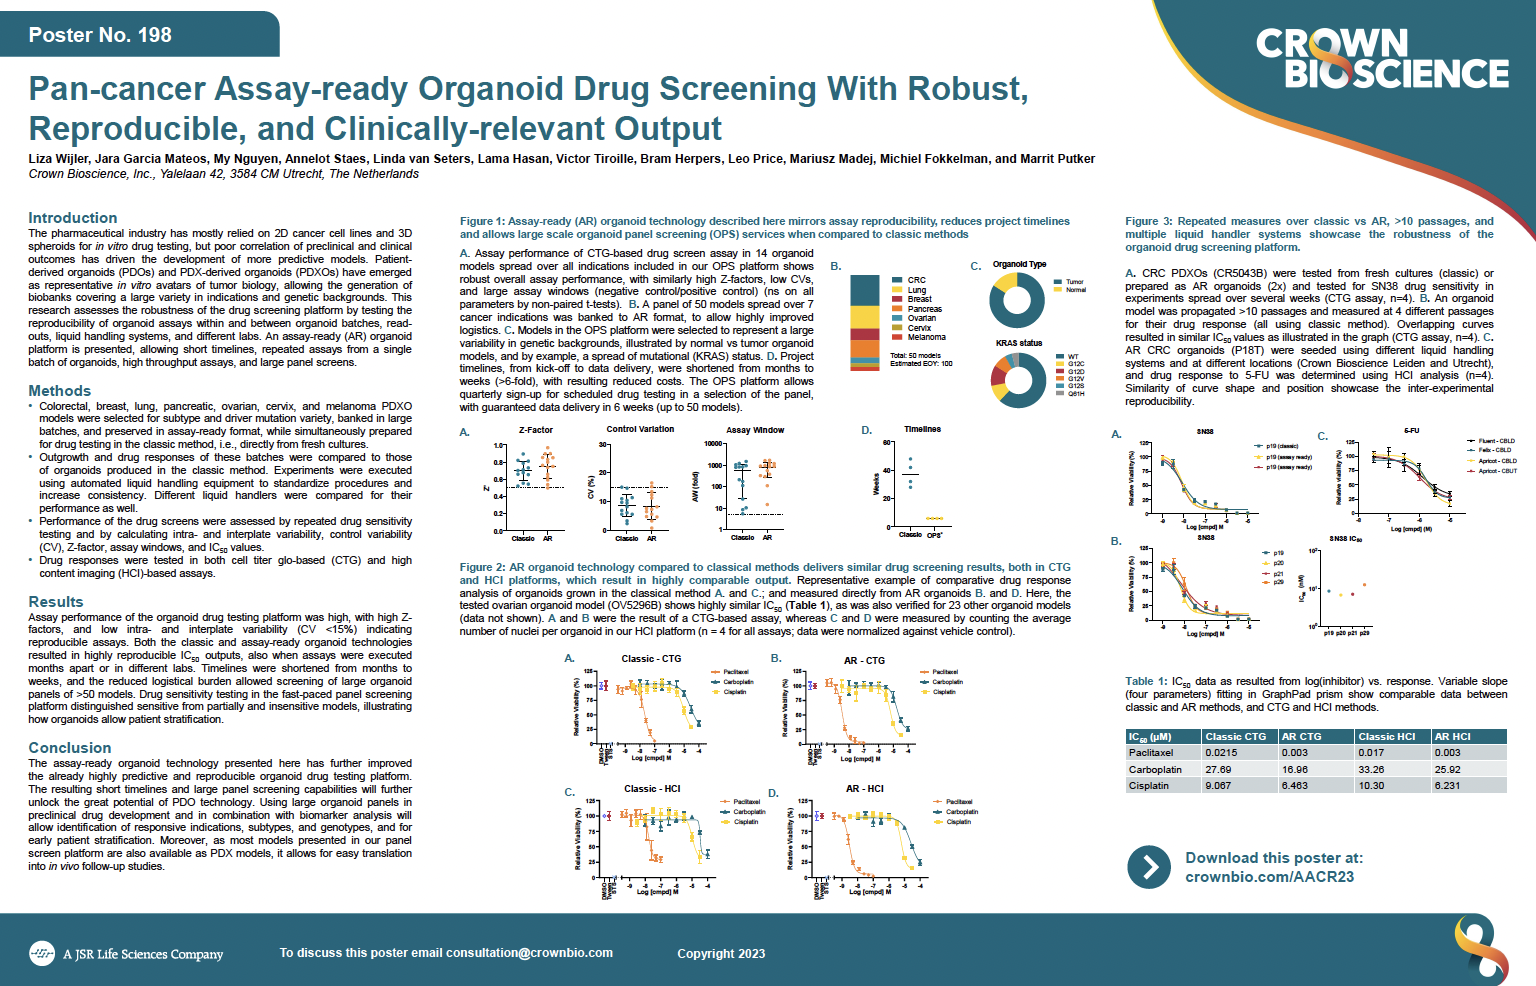 AACR 2023 Posters 198: Pan-cancer Assay-ready Organoid Drug Screening with Robust, Reproducible and Clinically-relevant Output